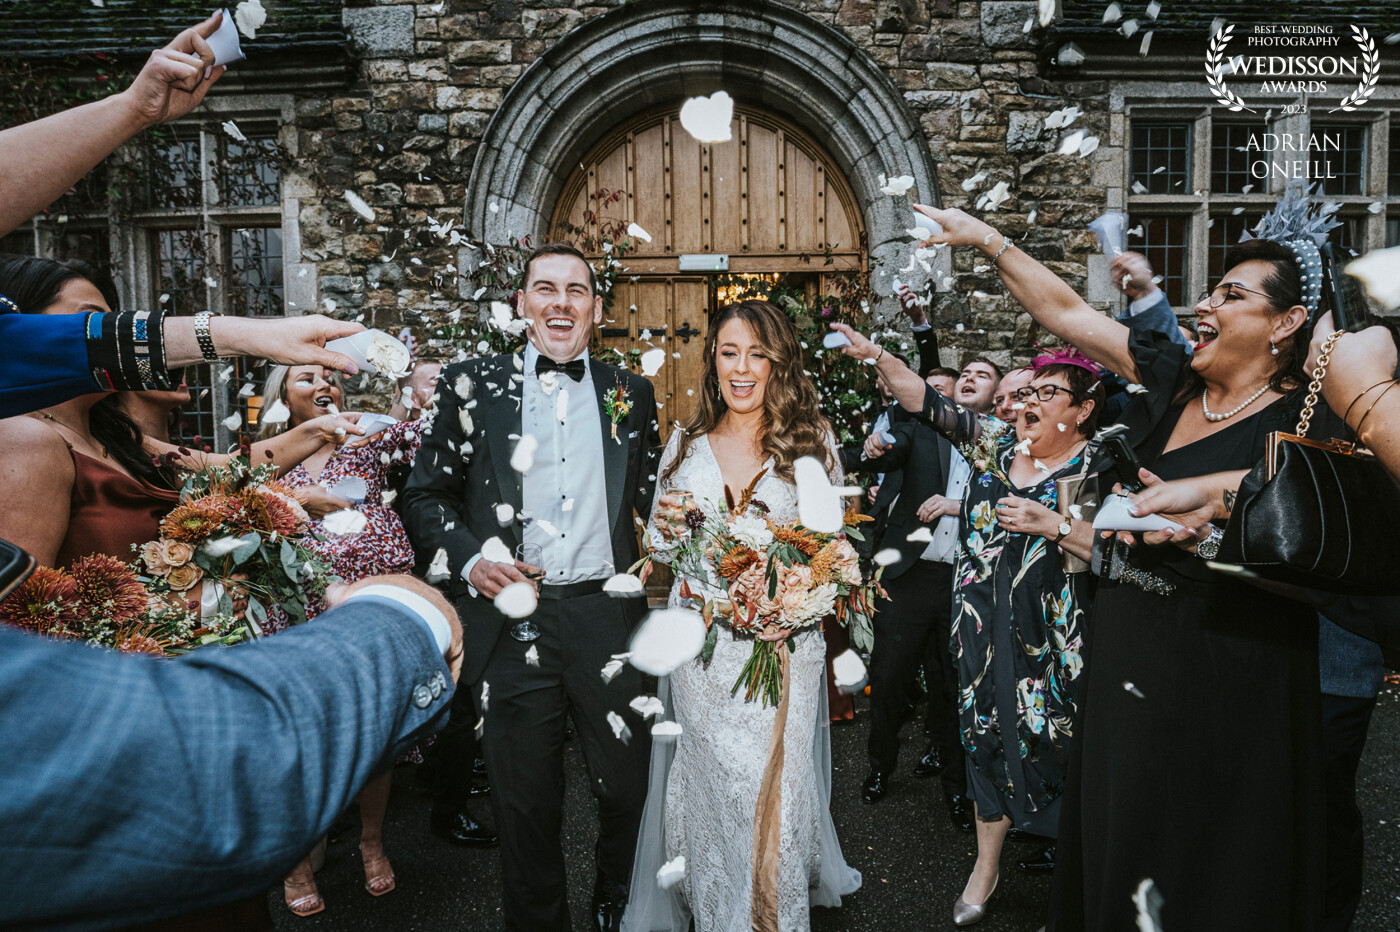 Cant beat a confetti shot....what a most unbelievable day and night at Waterford Castle...this couple partied the night away ...man they rocked it.